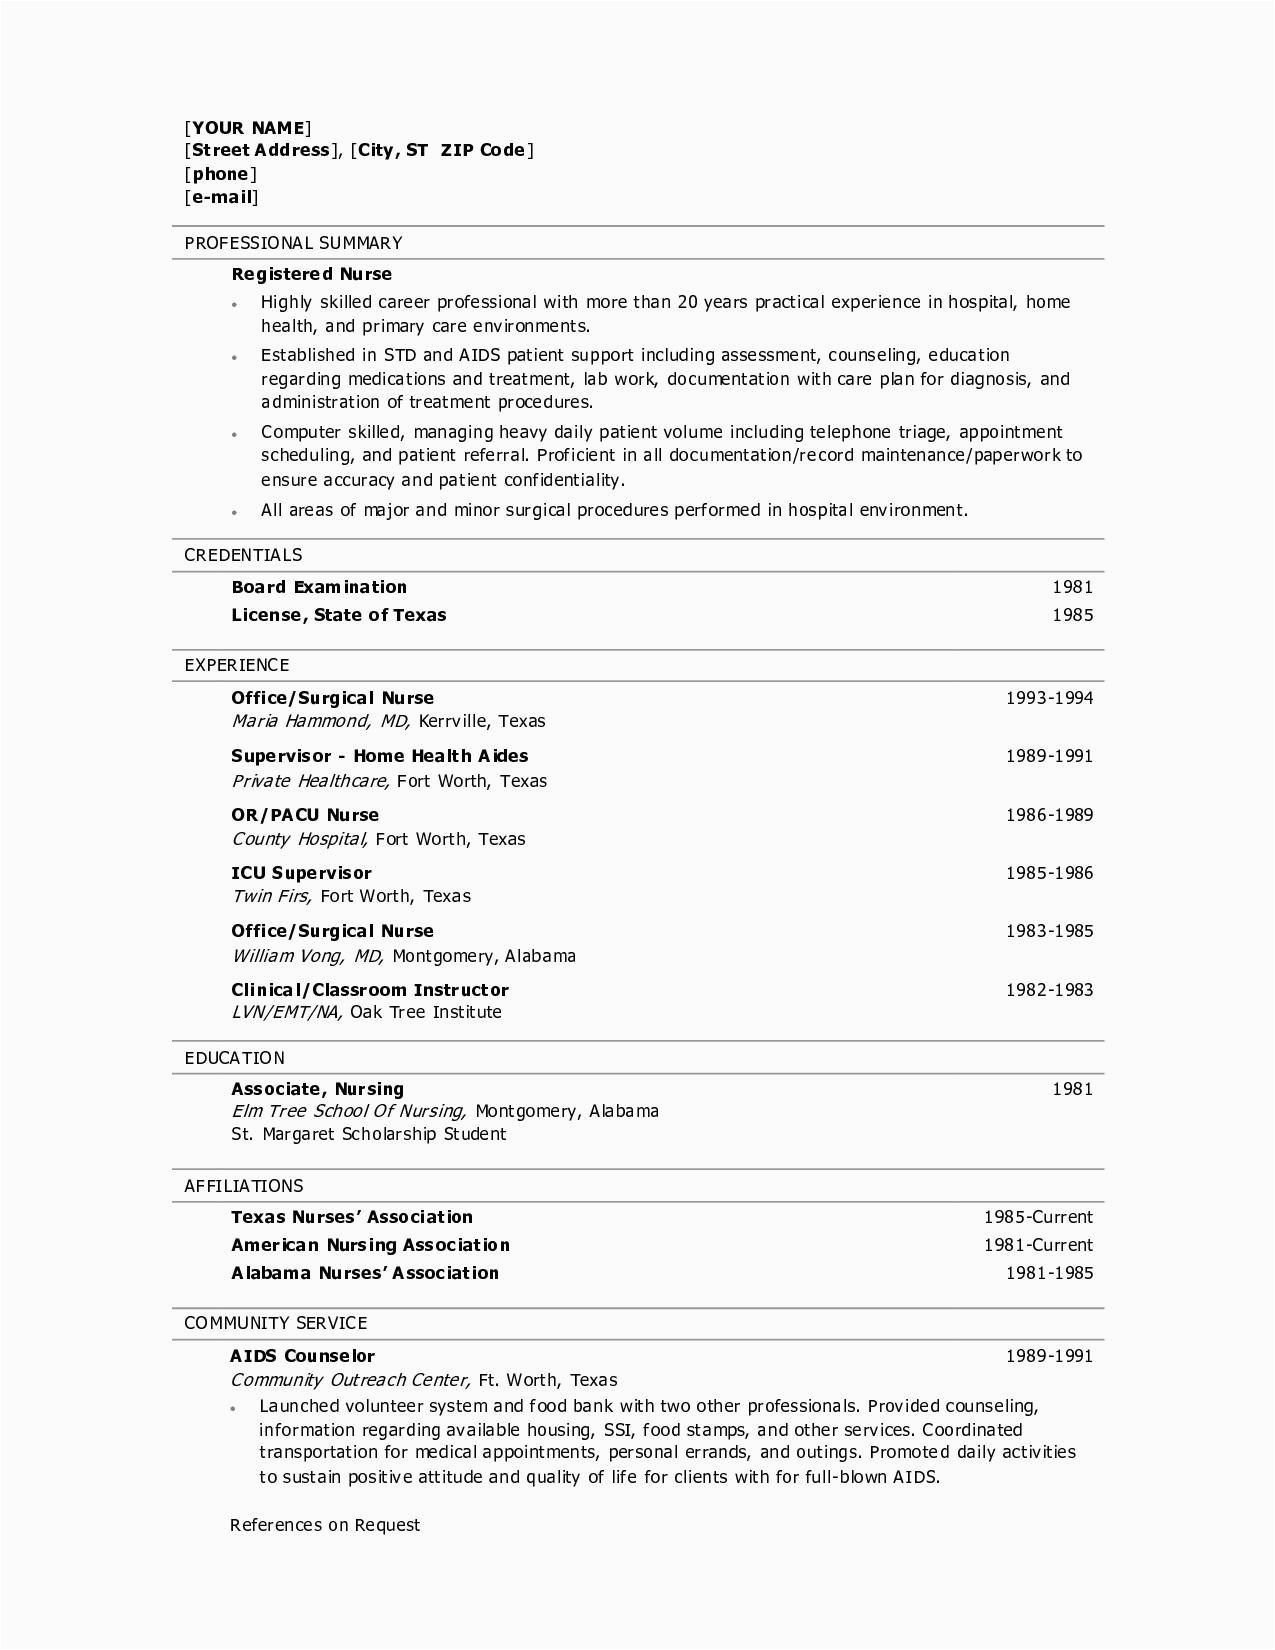 Sample Resume for Nurses without Experience In the Philippines Nursing Resume format Philippines Examples Resumes Sample